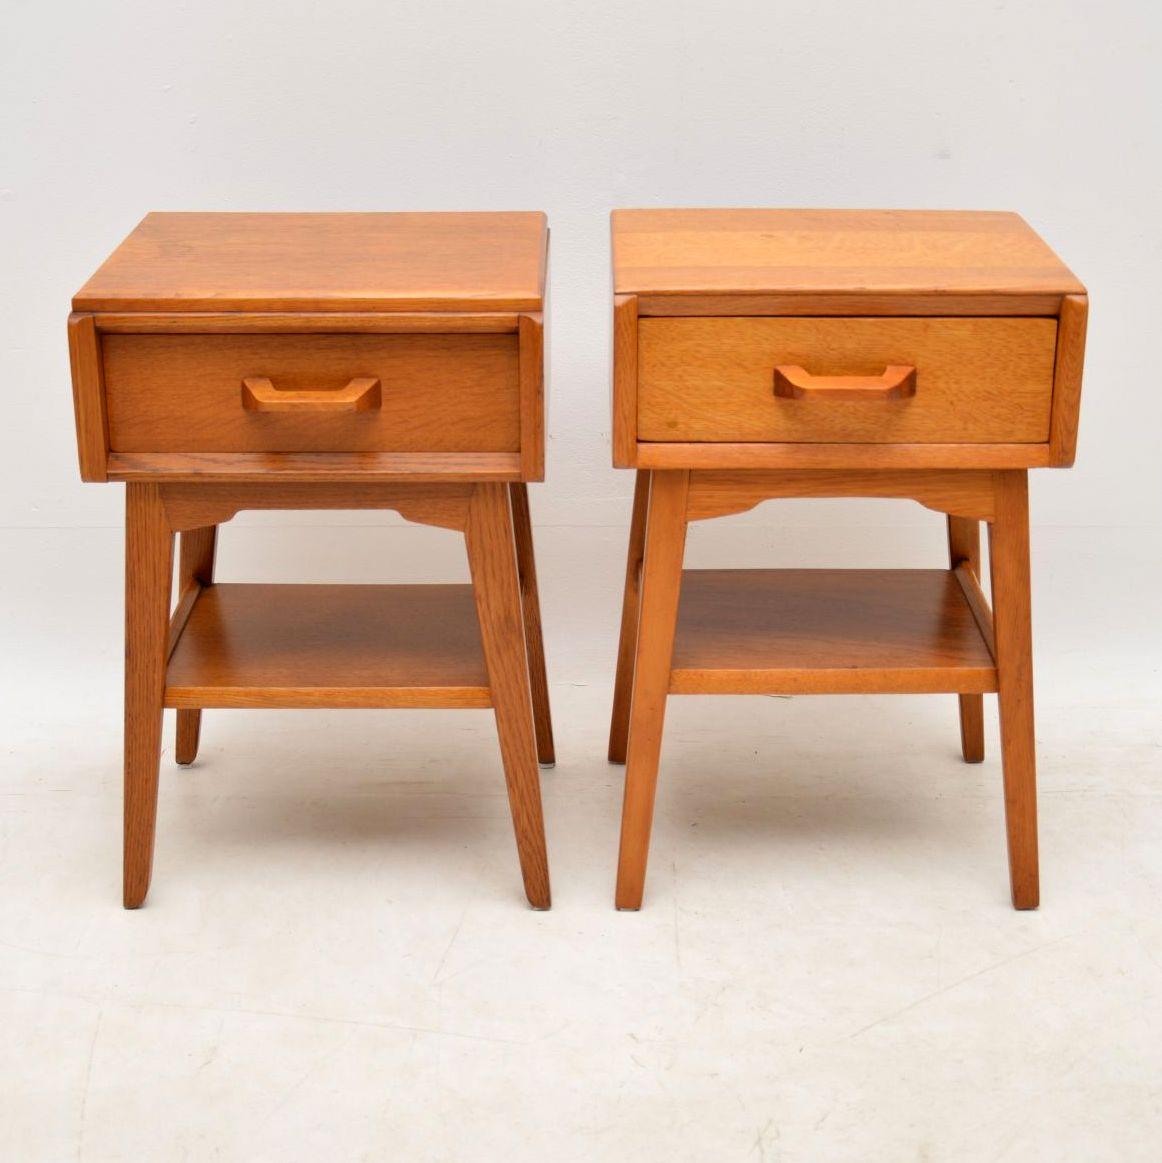 A stylish and very practical pair of vintage bedside tables in oak, made by G- Plan as part of the Brandon range in the 1950s. One of these tables is original, the other seems to have been made by someone to match the other. Considering this was